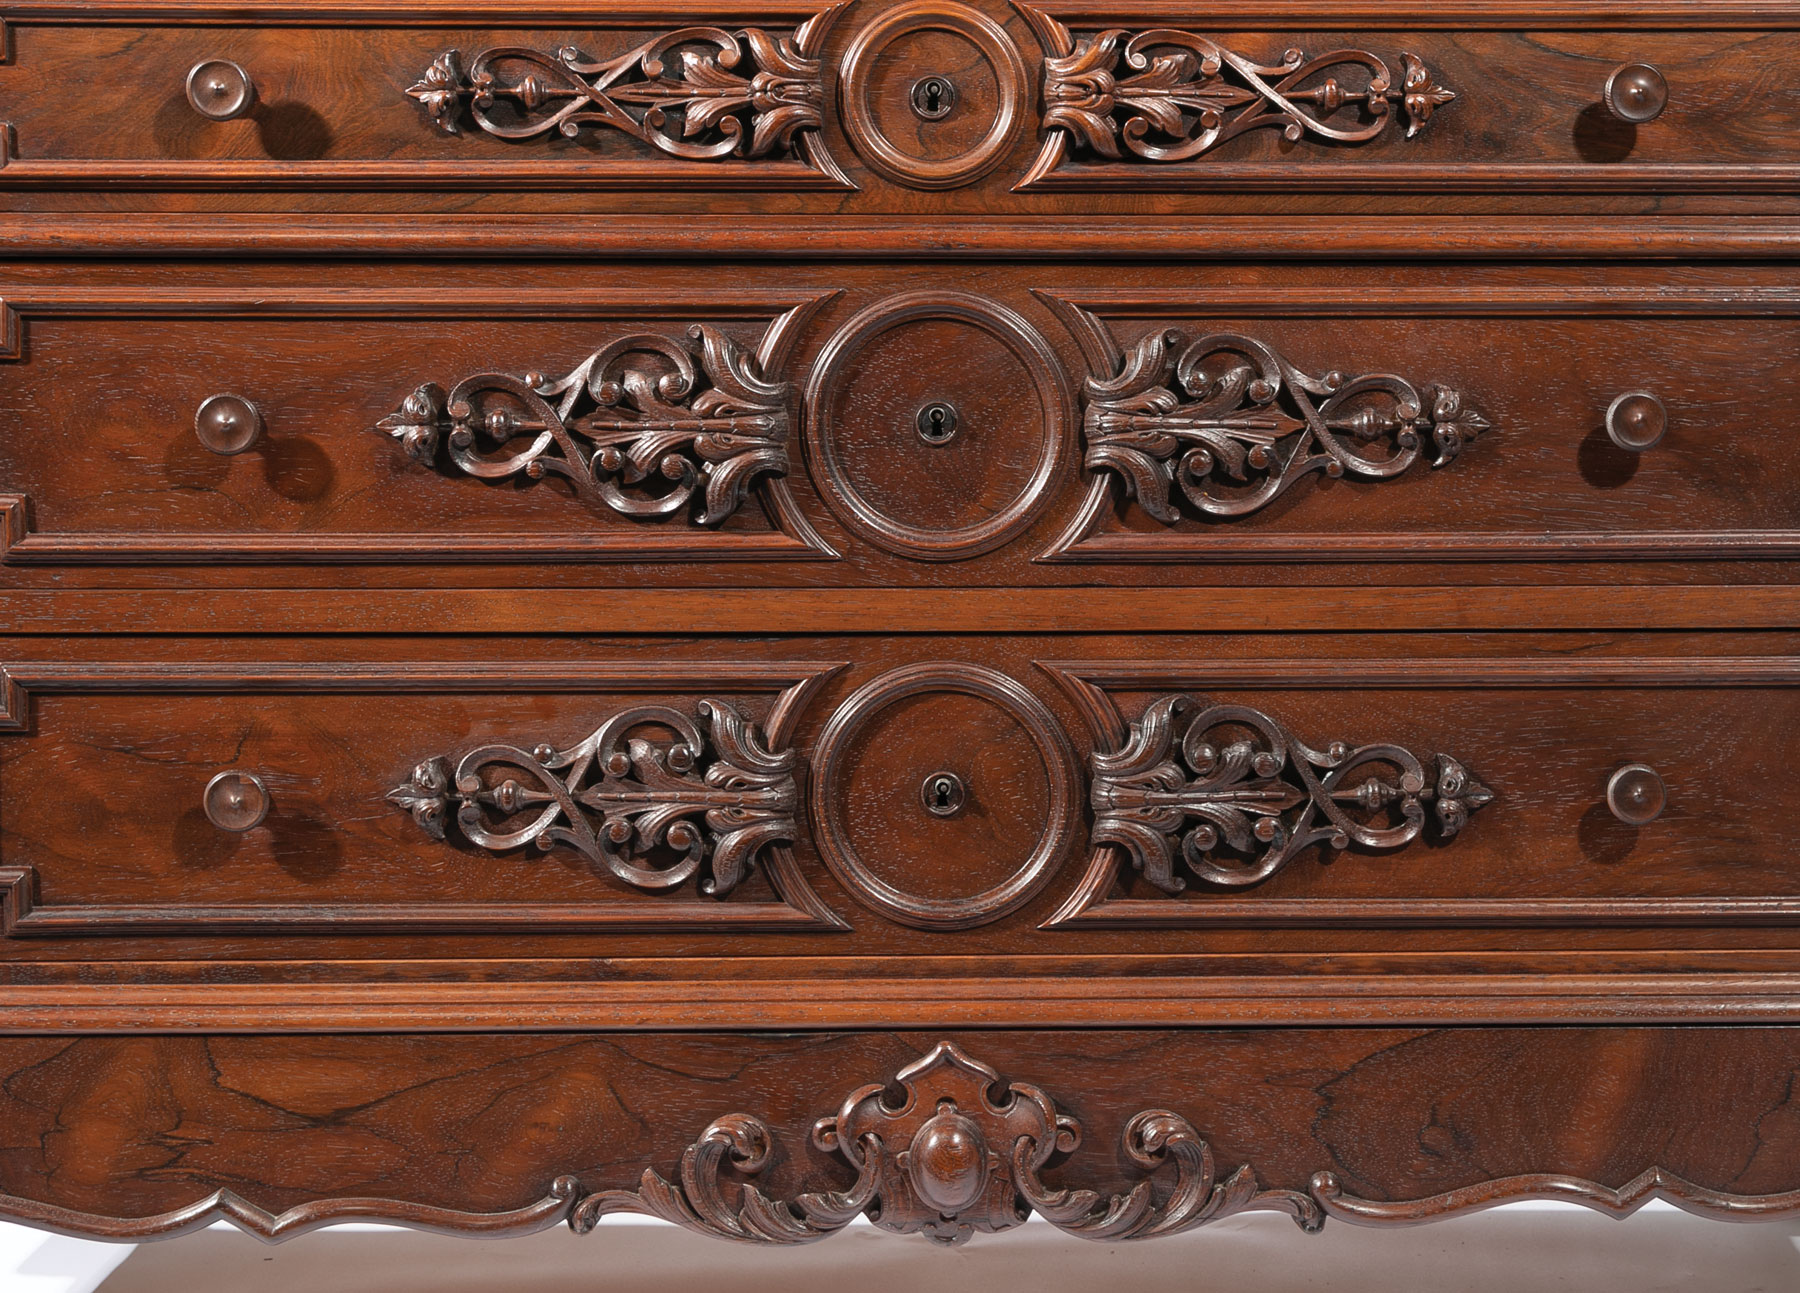 Very Fine American Carved Rosewood Bedroom Suite , mid-19th c., labeled A. (Alexander) Roux, incl. - Image 4 of 20